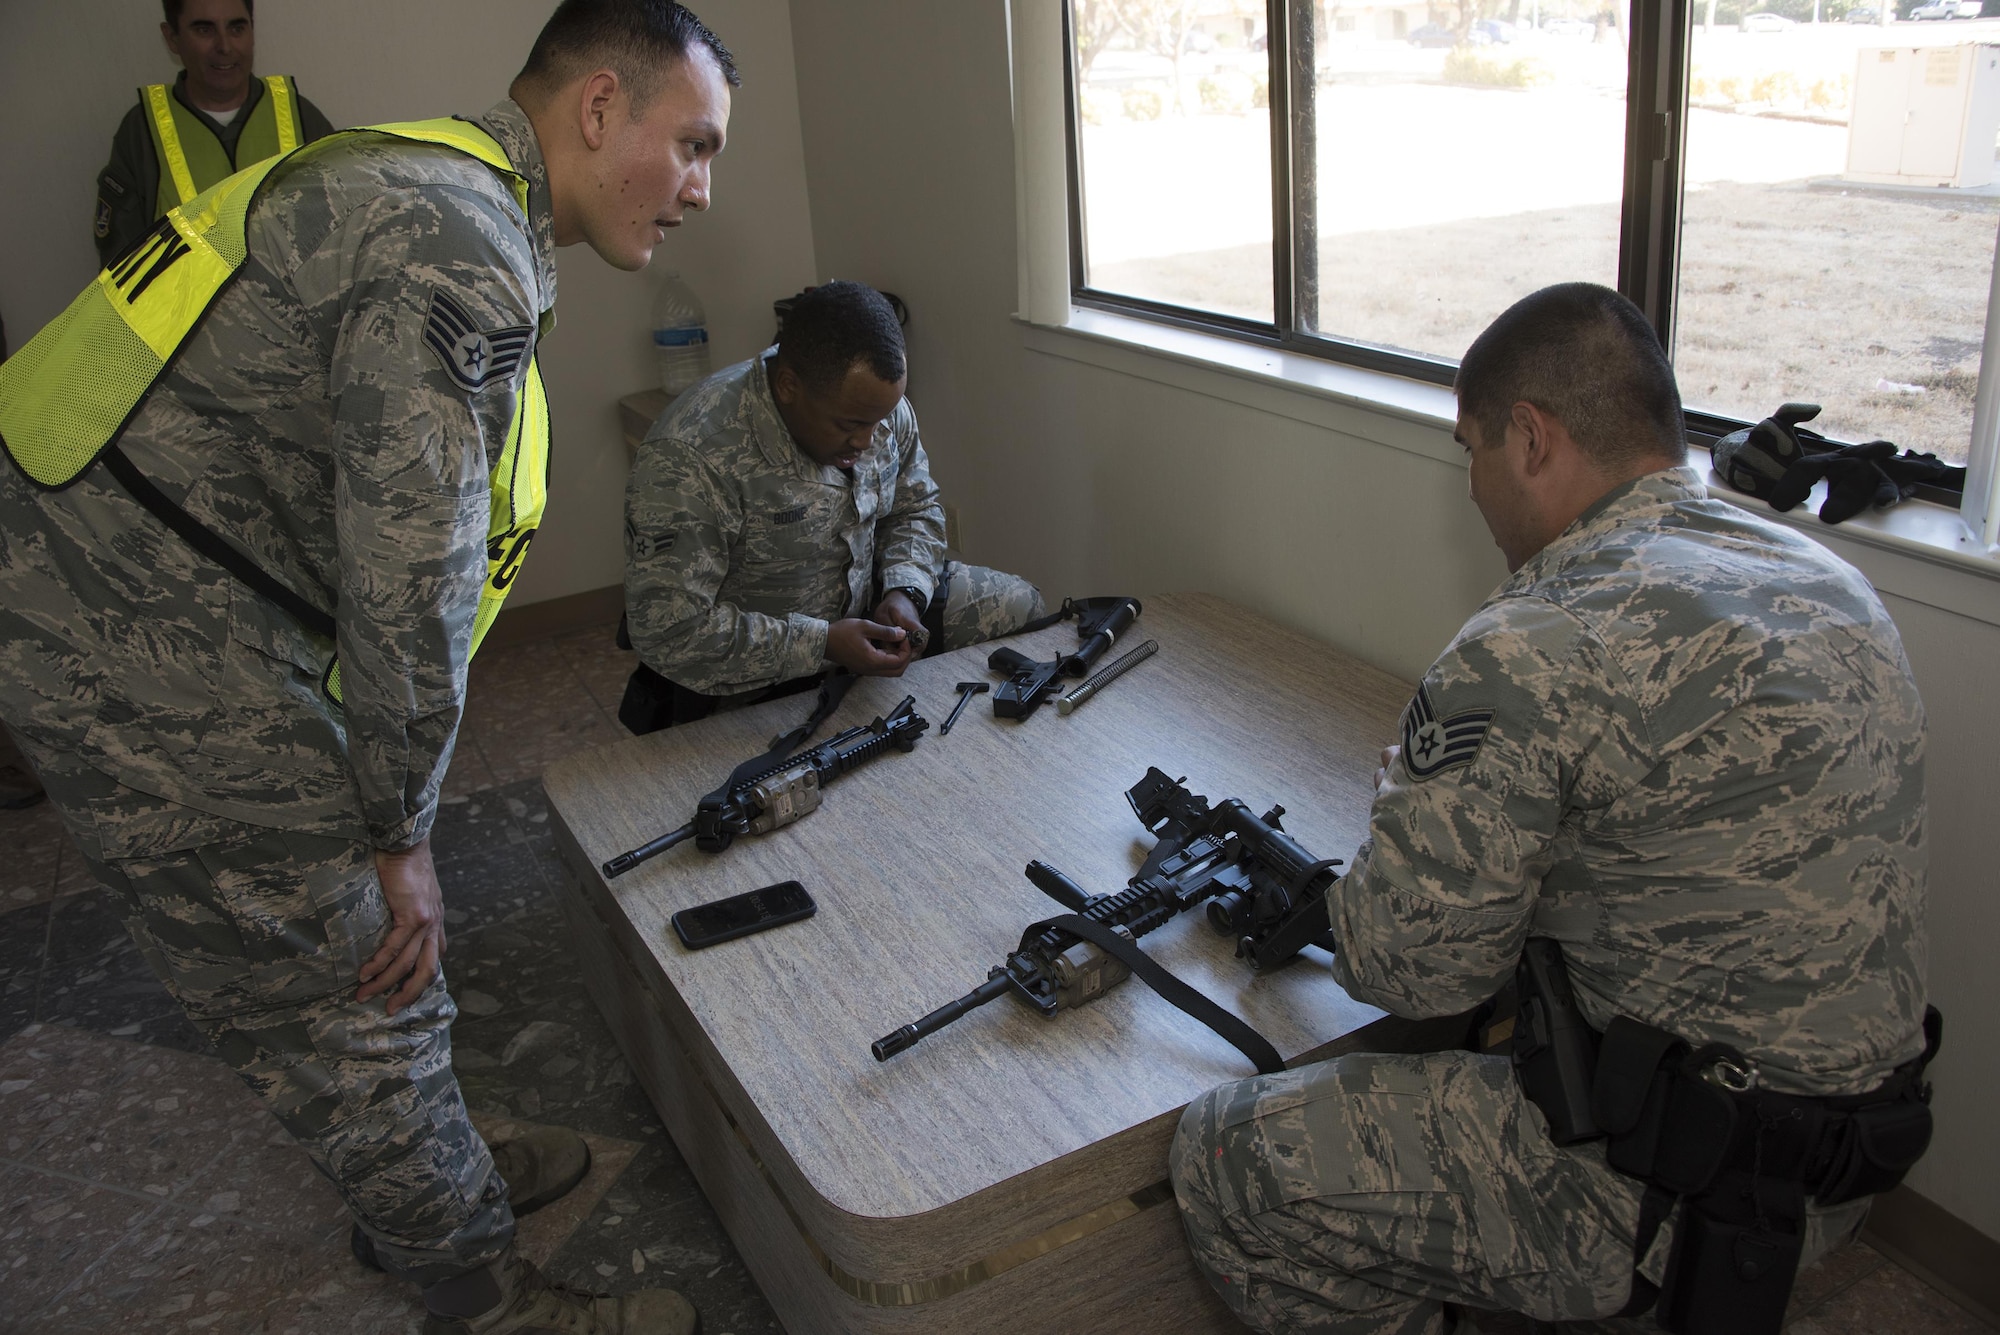 U.S. Air Force Airman 1st Class Christopher Boone, and Staff Sgt. Jamie Tovar, both with 60th Security Forces Squadron, have minutes to dissemble and reassemble a weapon while answering questions being rapidly asked by an instructor during Defender Annual Refresher crucible training, Oct. 27, Travis Air Force Base, Calif.  60th SFS team members go through a 30-day period of intense training for the DART program. The teams of specially trained security forces personnel are dedicated to providing security for terrorist and criminal threat areas.